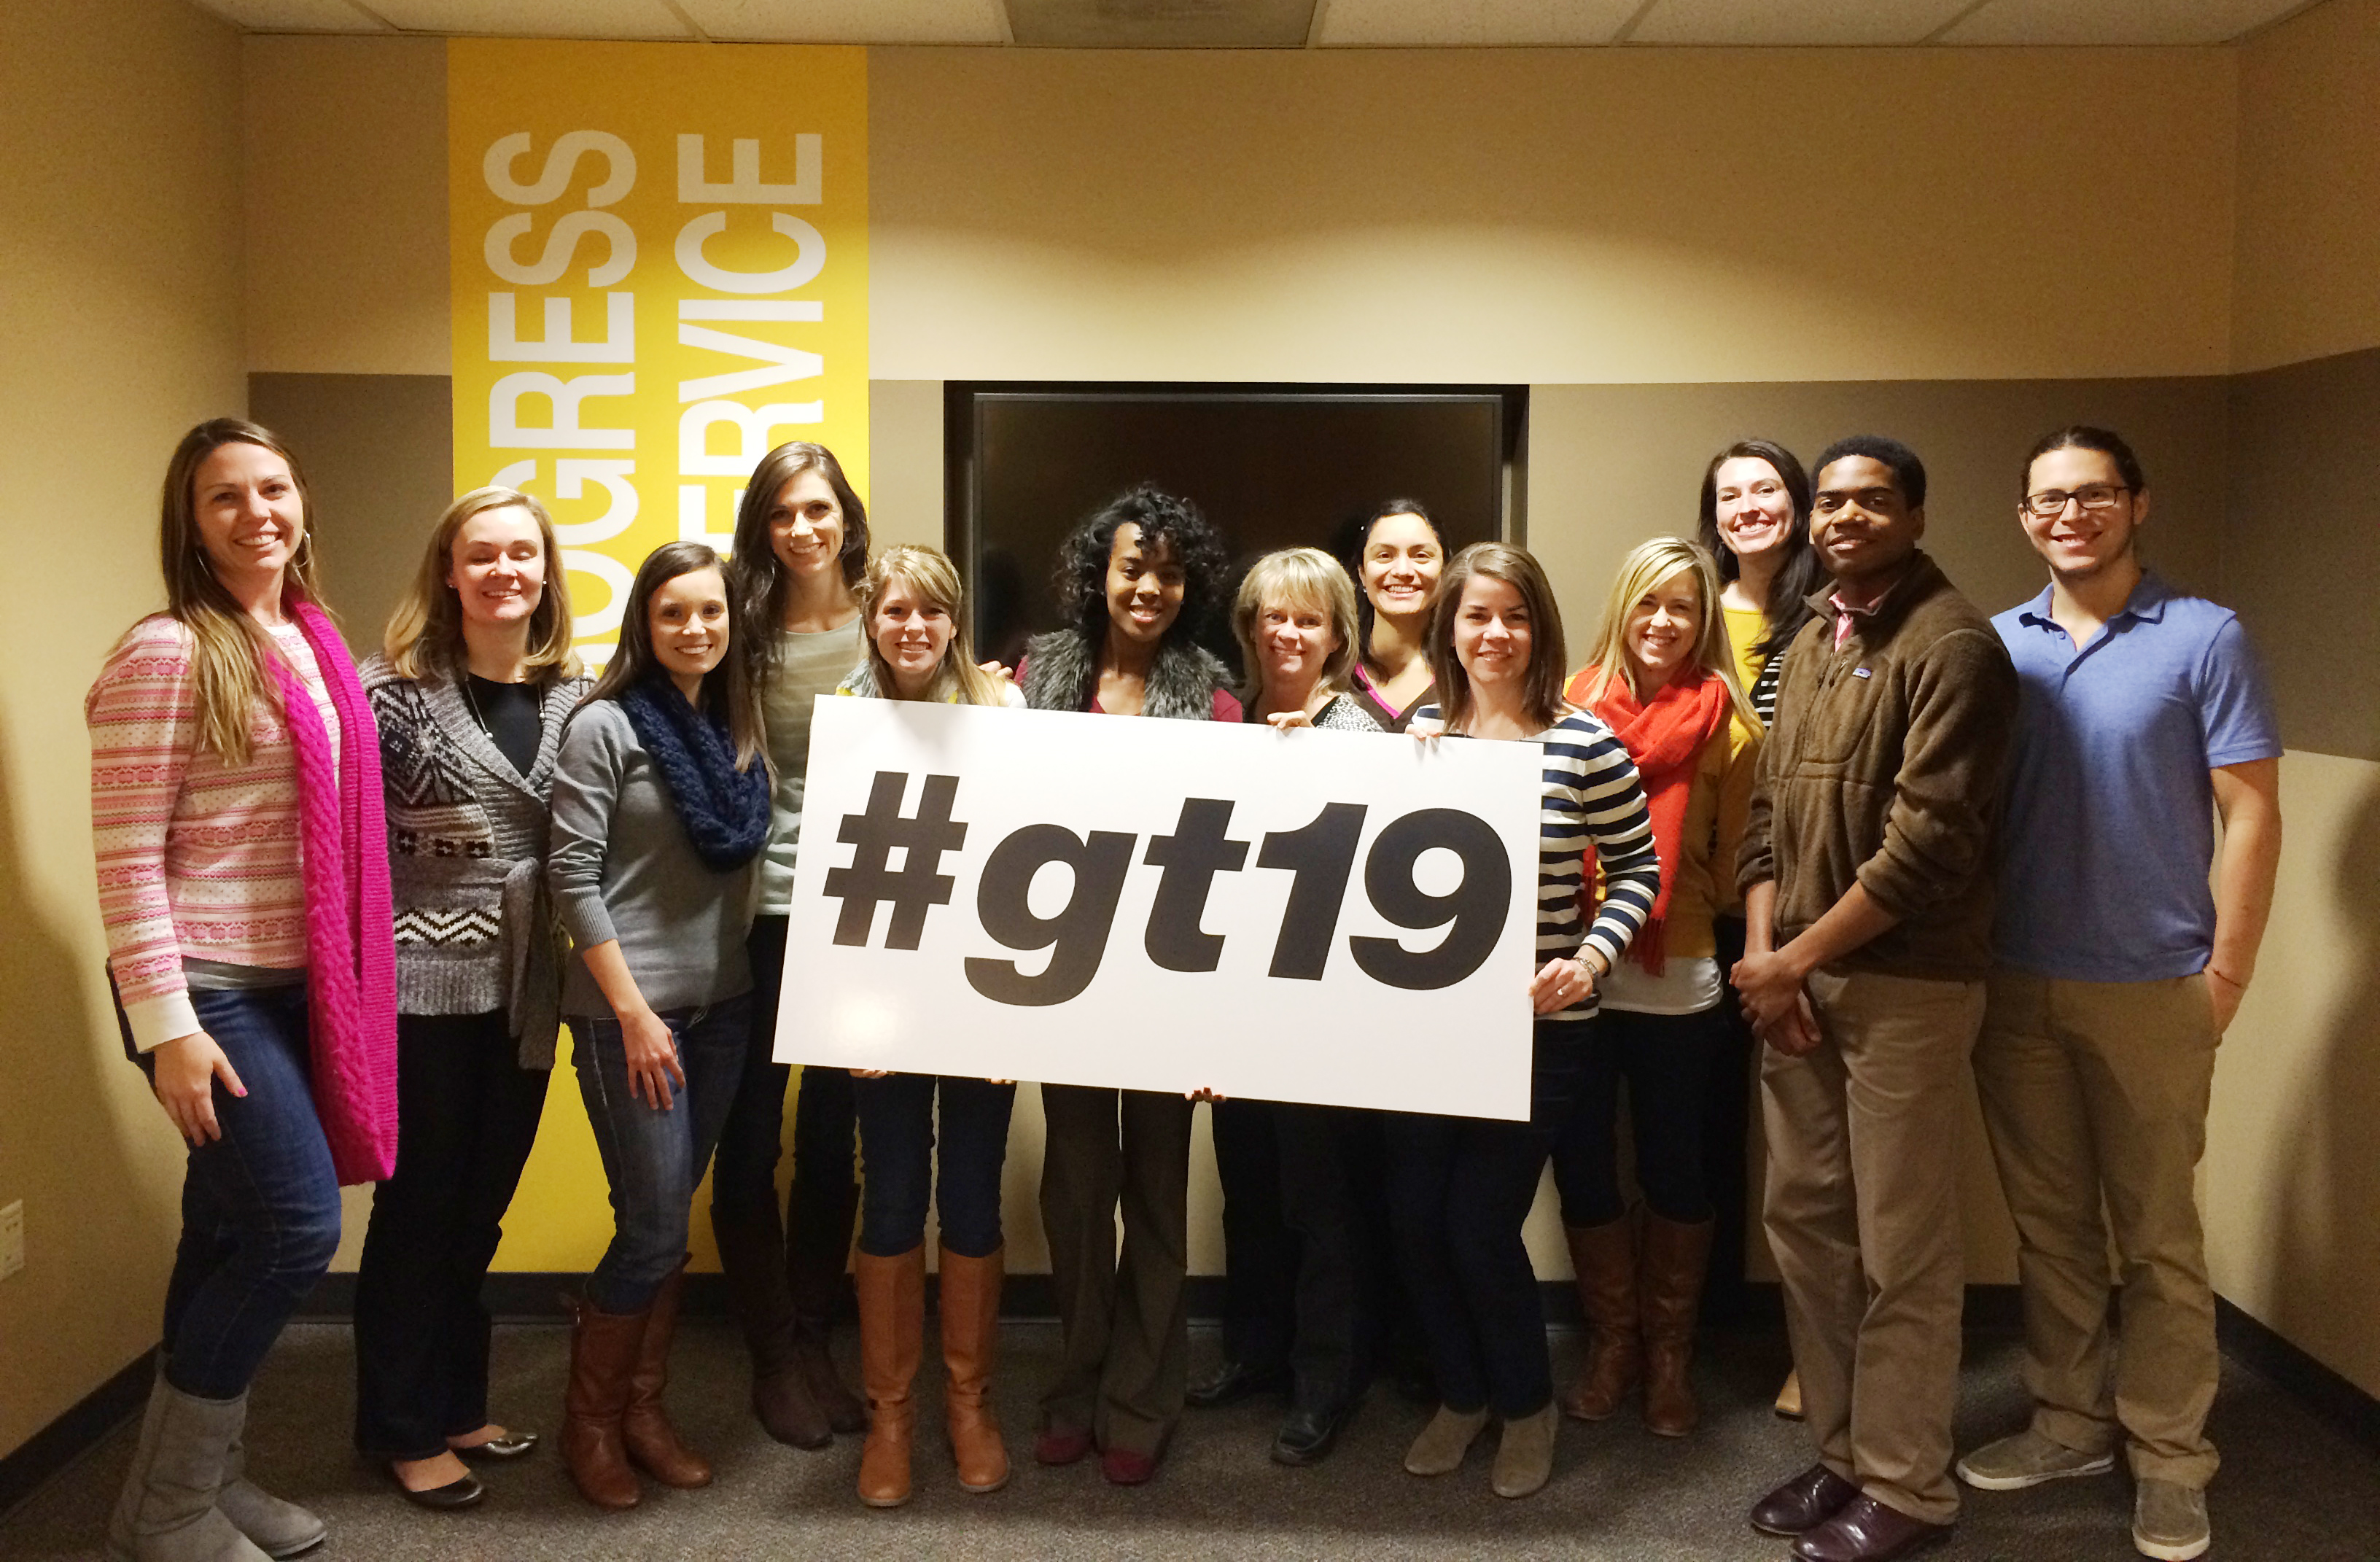 Staff from the Office of Undergraduate Admission welcome accepted freshman, who shared their excitement on social media with the #gt19 hashtag.